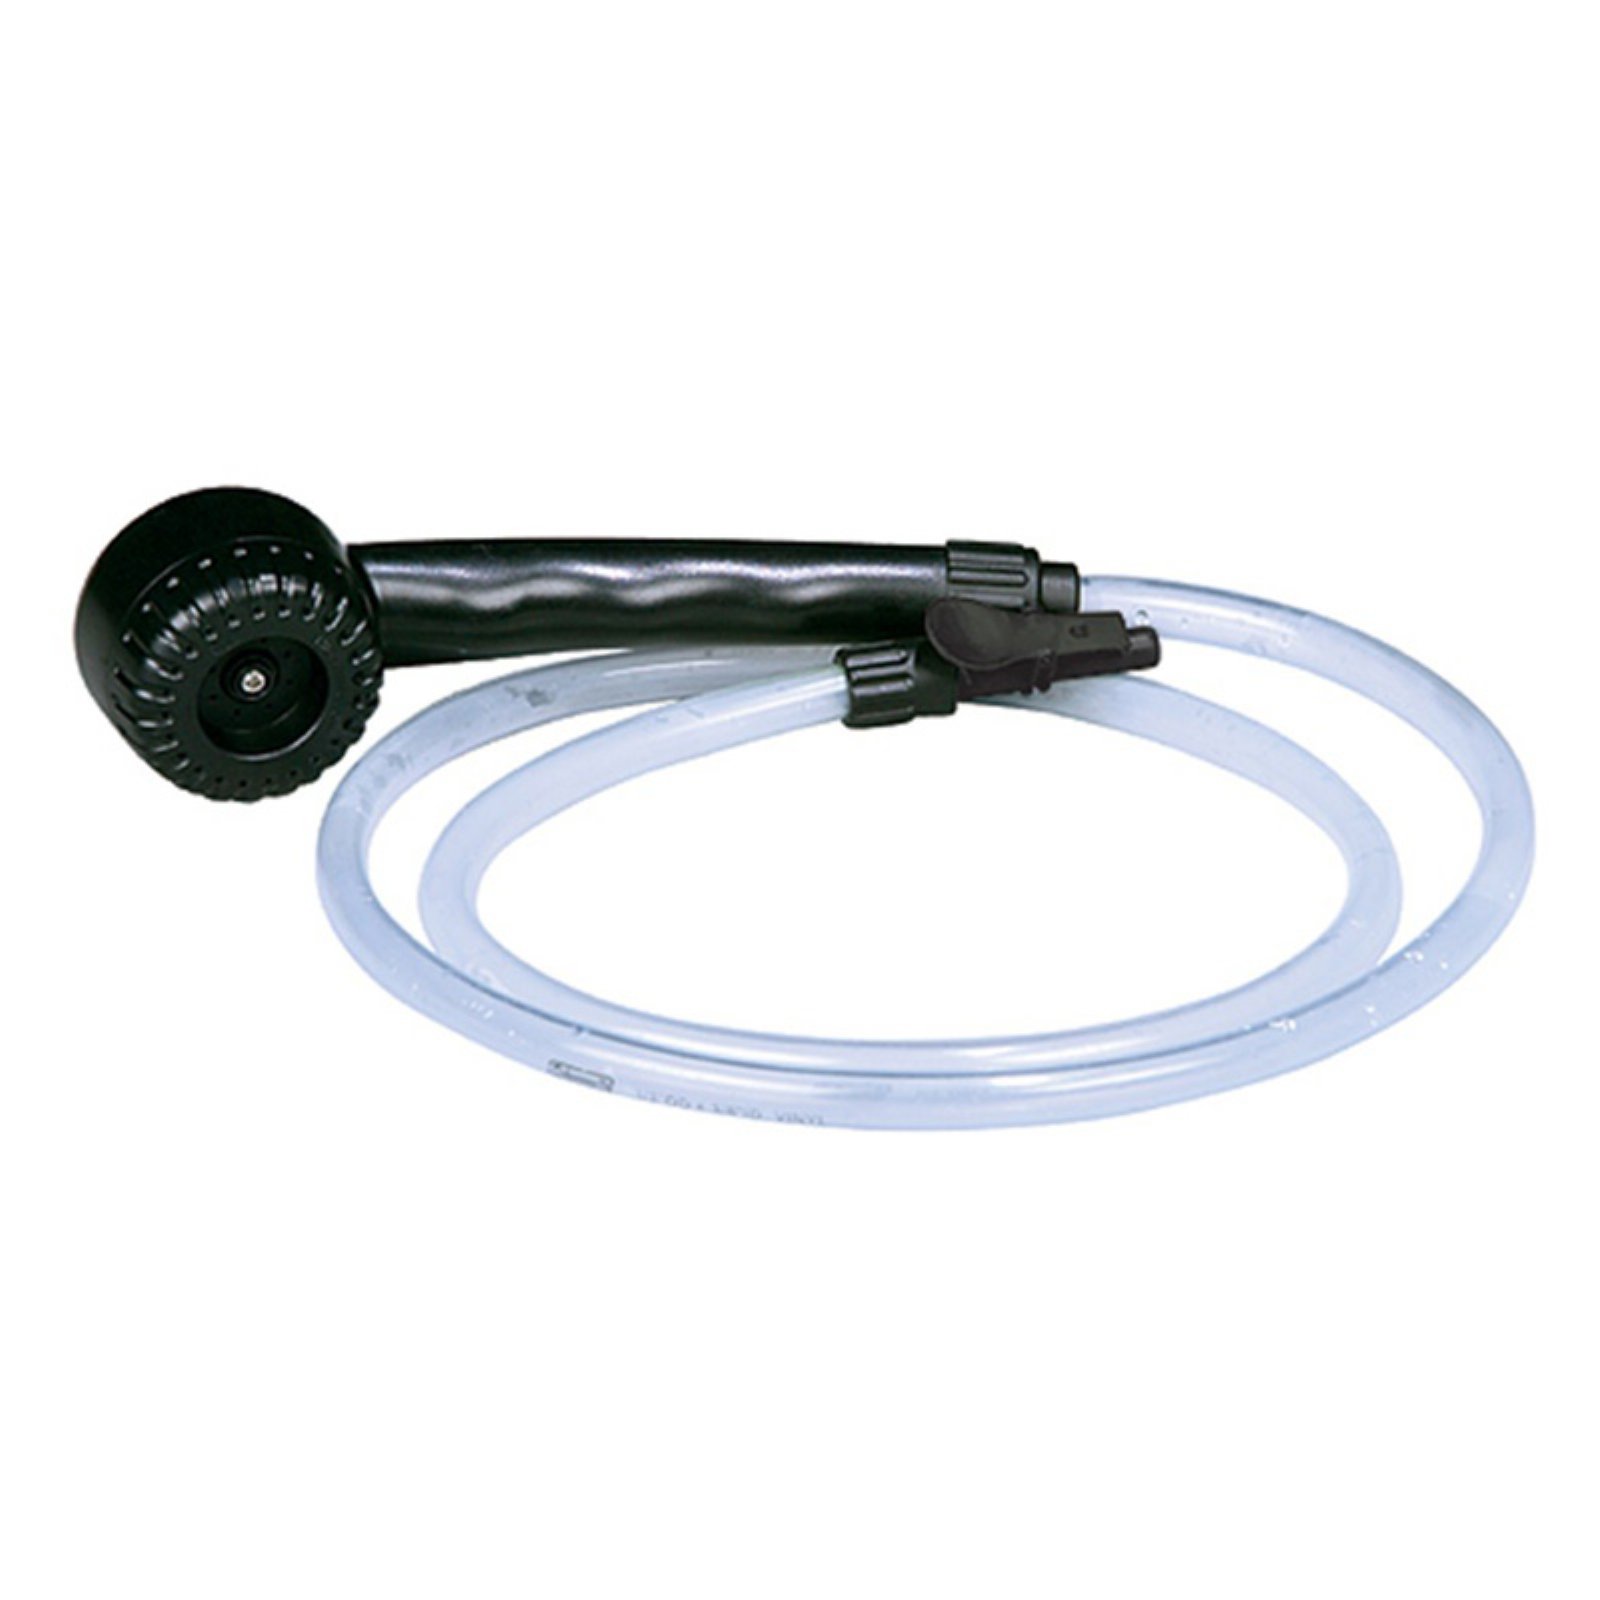 Coleman Spray Adapter for H2Oasis Portable Water Heater - image 1 of 2